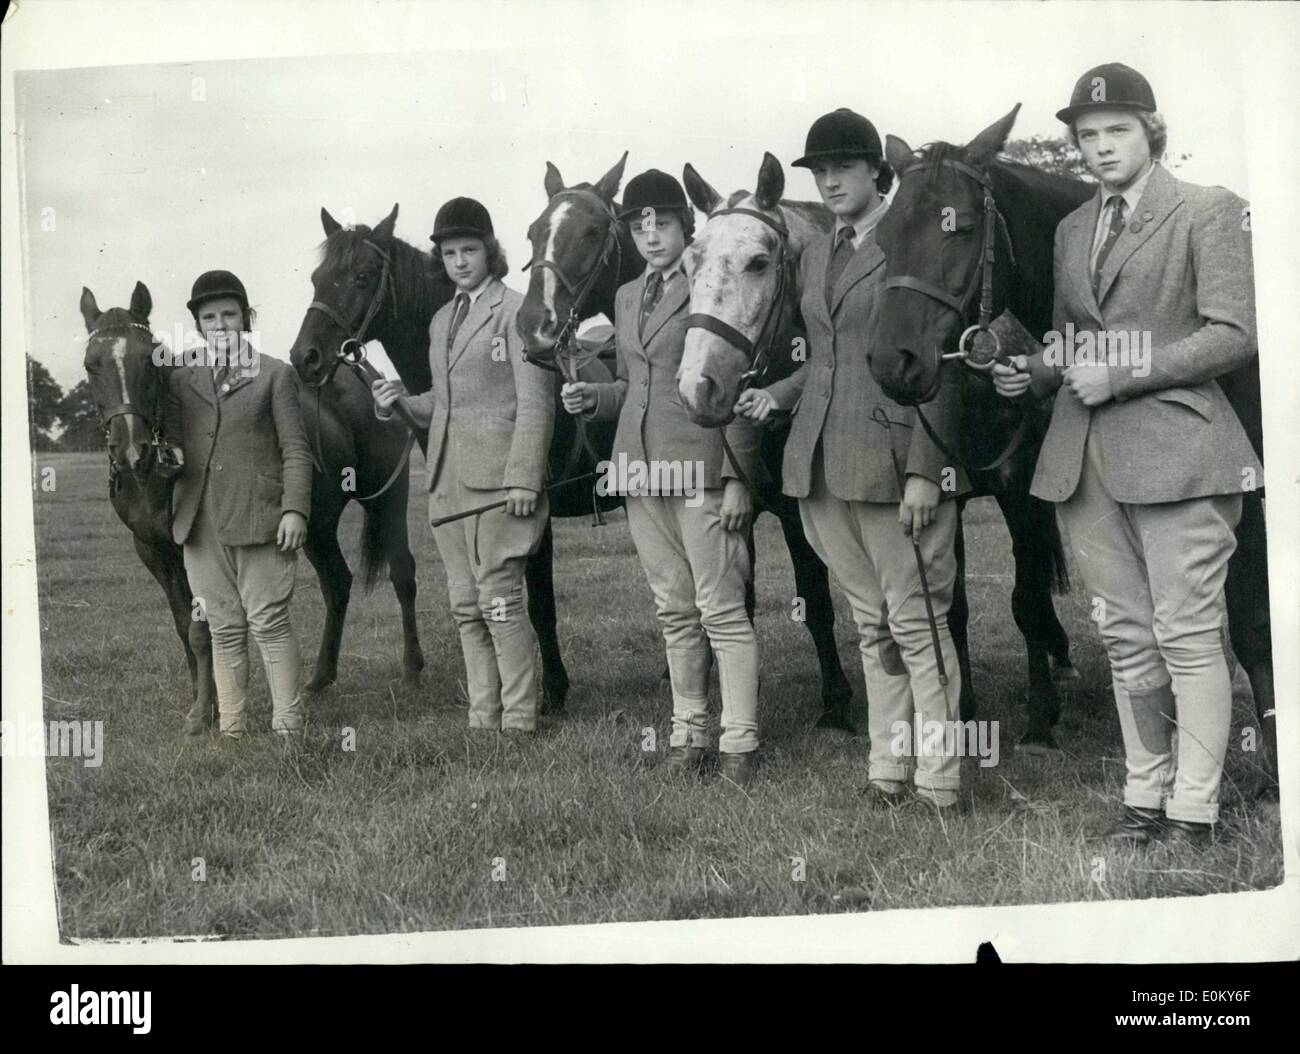 Nov. 11, 1952 - Five Riding sisters. The five riding daughters of Mr. and Mrs. J.D.Aysh, of Hardham, near Pulborough, Sussex, won 162 prizes and trophies during the Gymkhana and horse show season - and have now started riding with the hunts. Photo shows (Left to right) Sonia, aged 11, with, ''Wendy'', Laraine, 14, with ''Joe'' , veroniga, 15, with ''Black Patrick''; Rosalie, aged 17 with ''Stell'' and Diana, 19, with ''Rosette'', seen yesterday before exercising their horses. Stock Photo